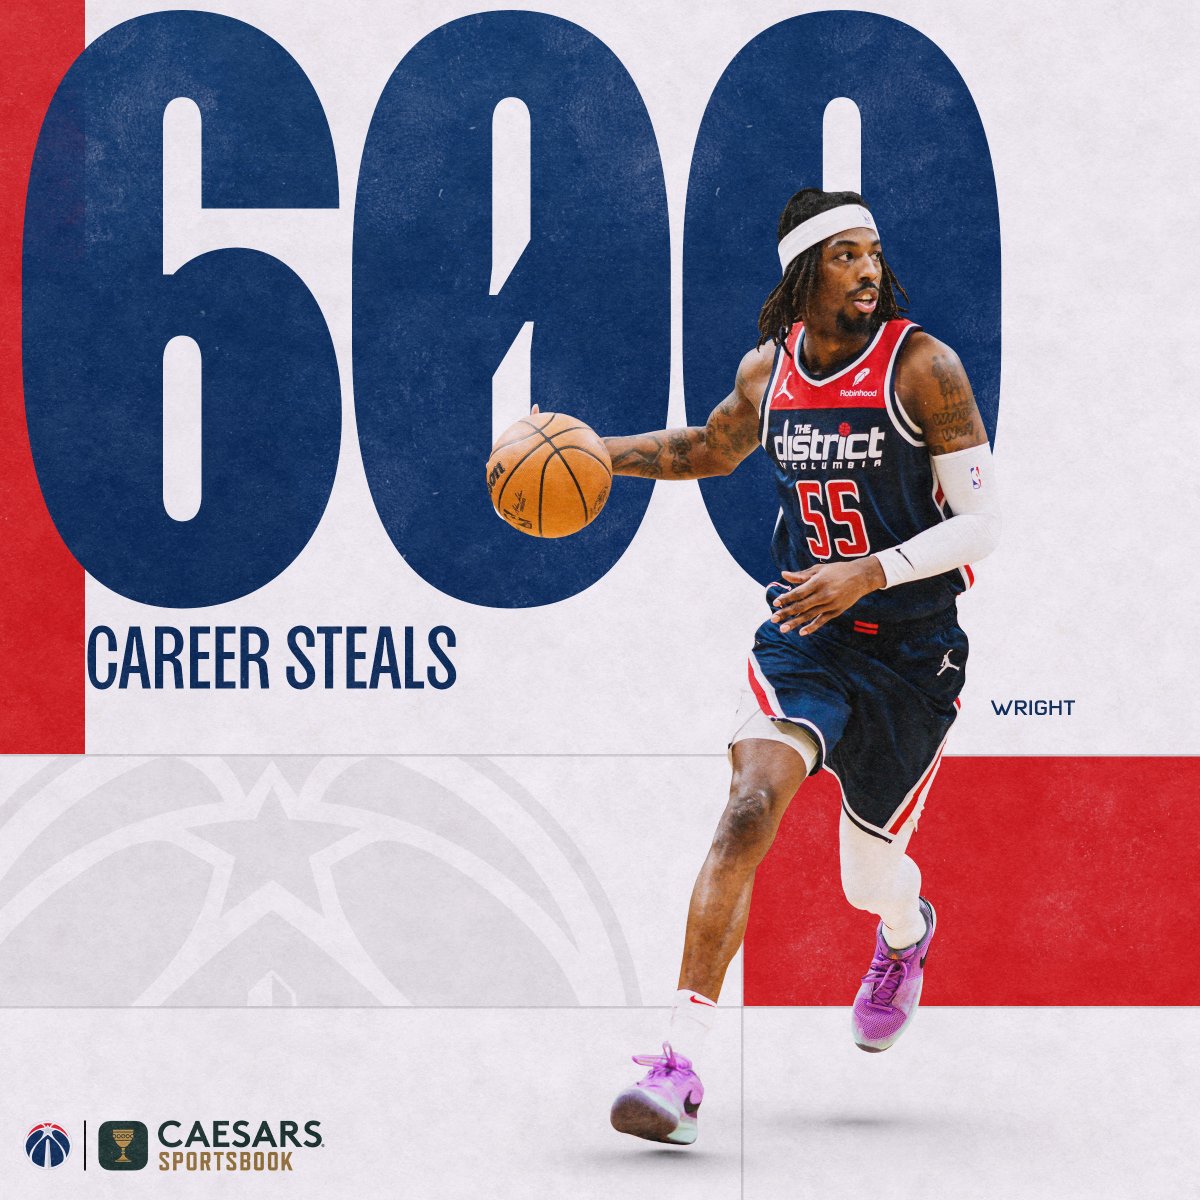 600 career steals for Del🍪n. @delonwright | @CaesarsSports